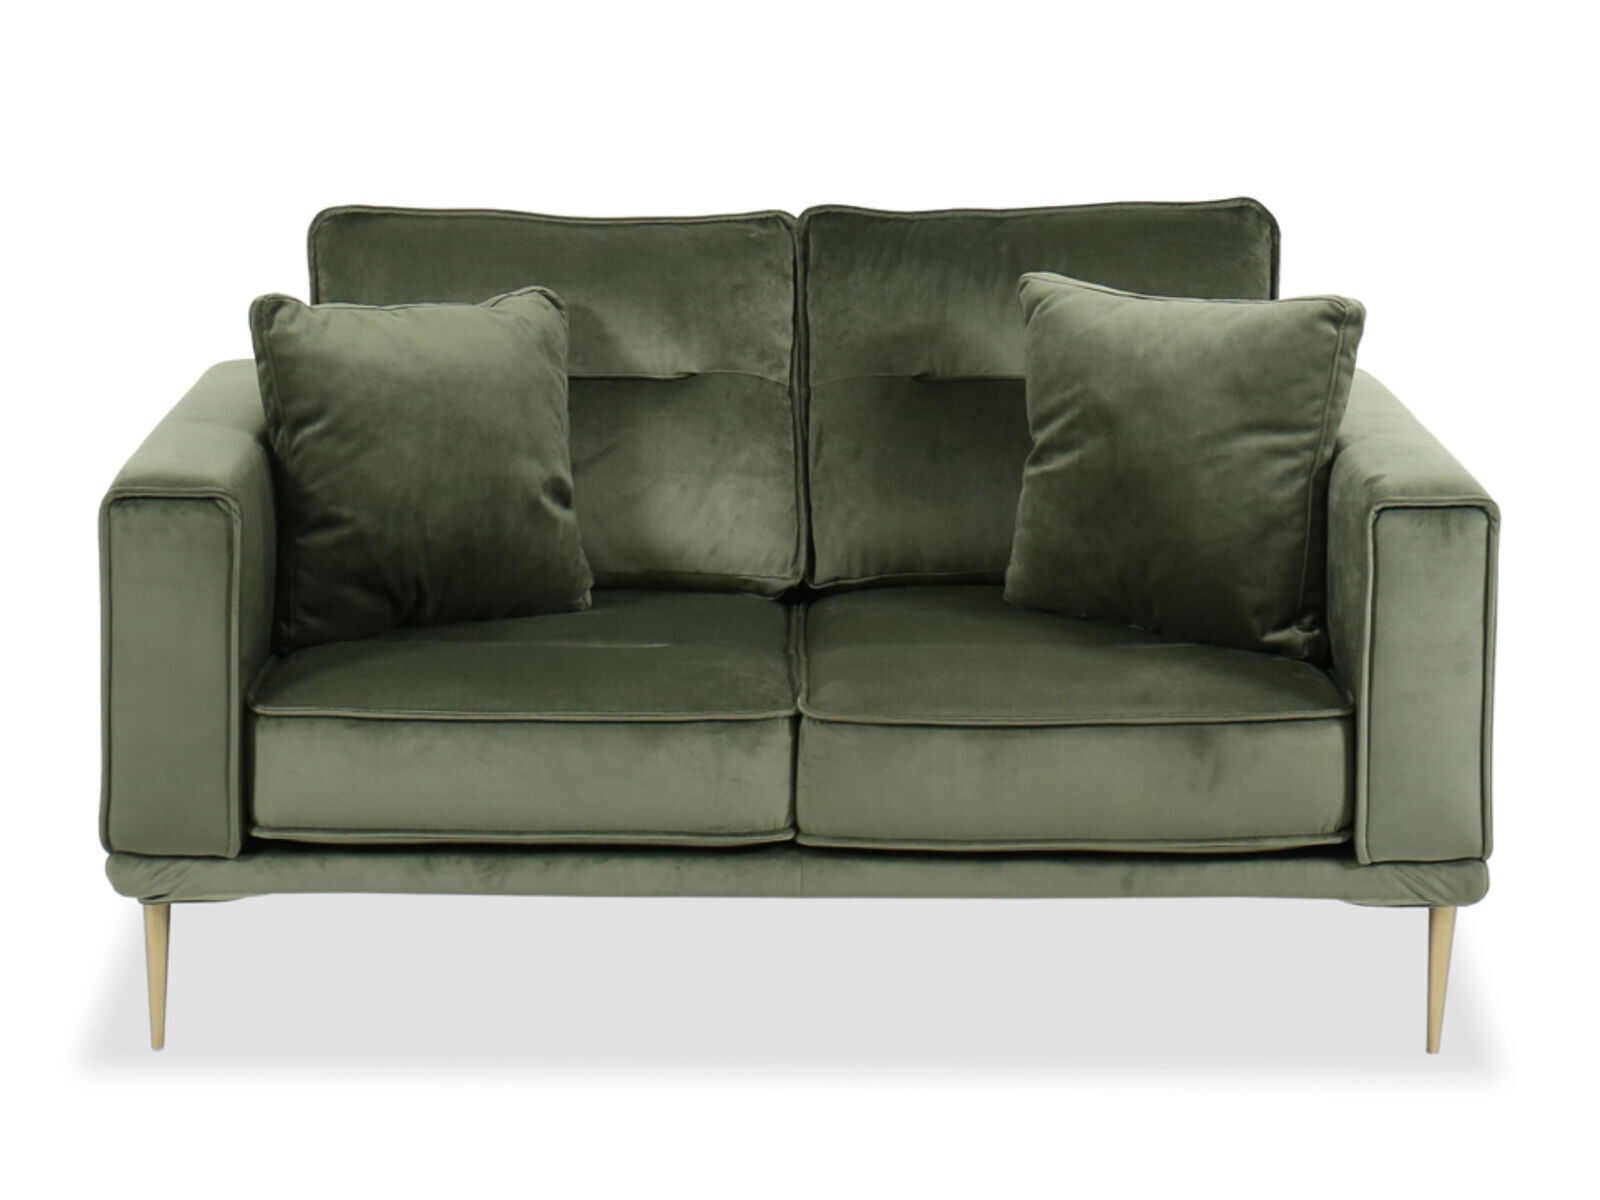 Macleary Green Loveseat